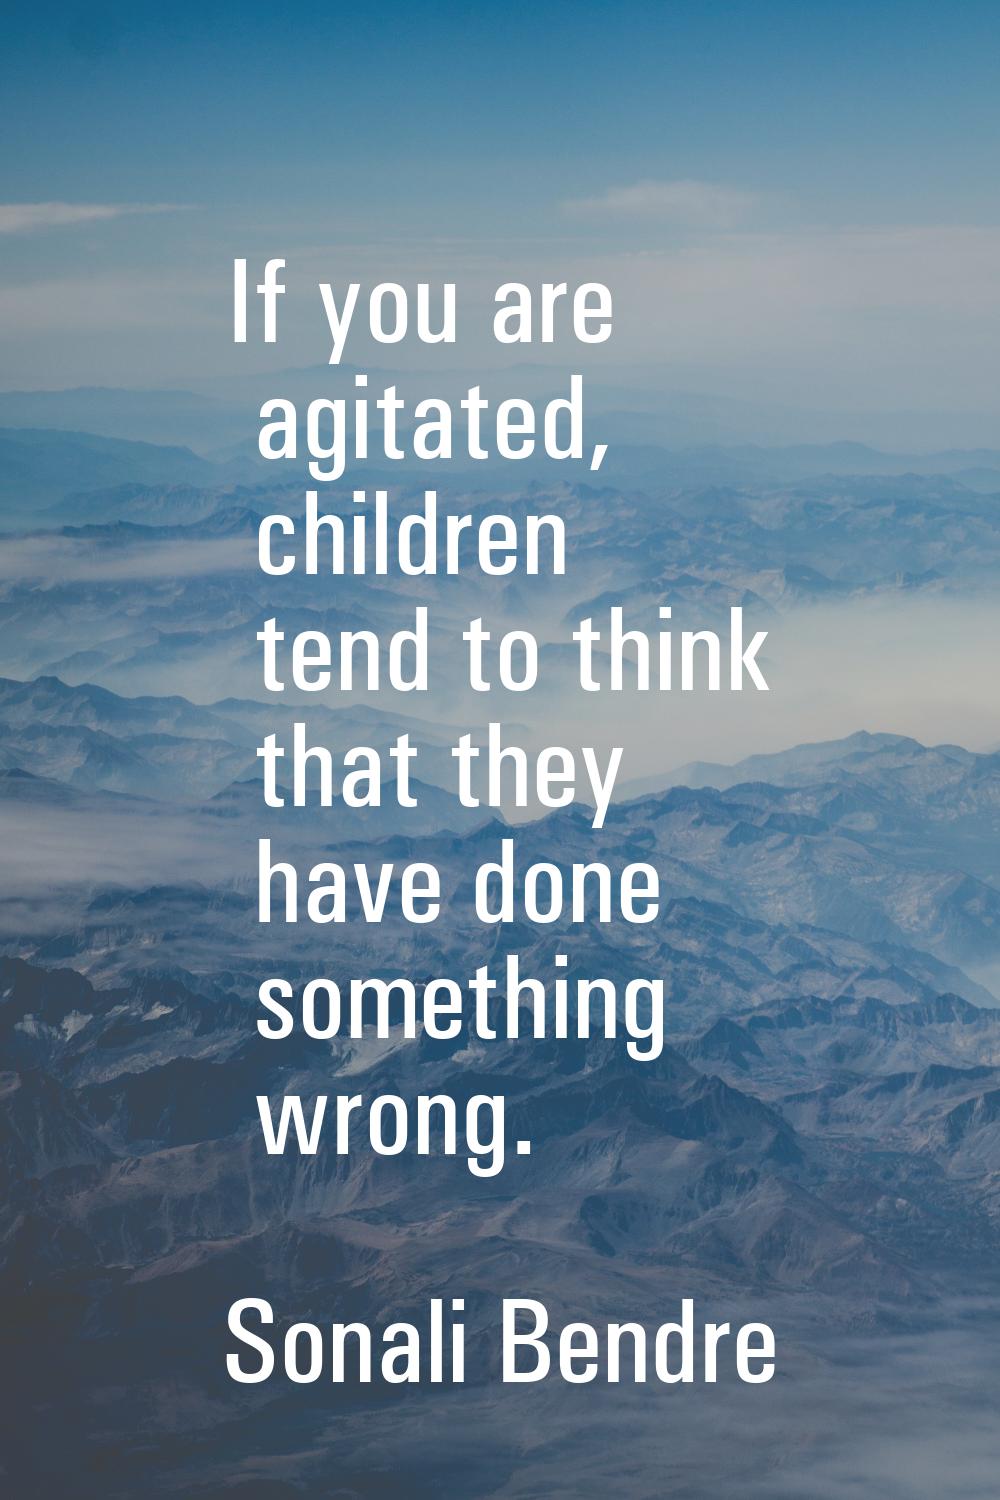 If you are agitated, children tend to think that they have done something wrong.